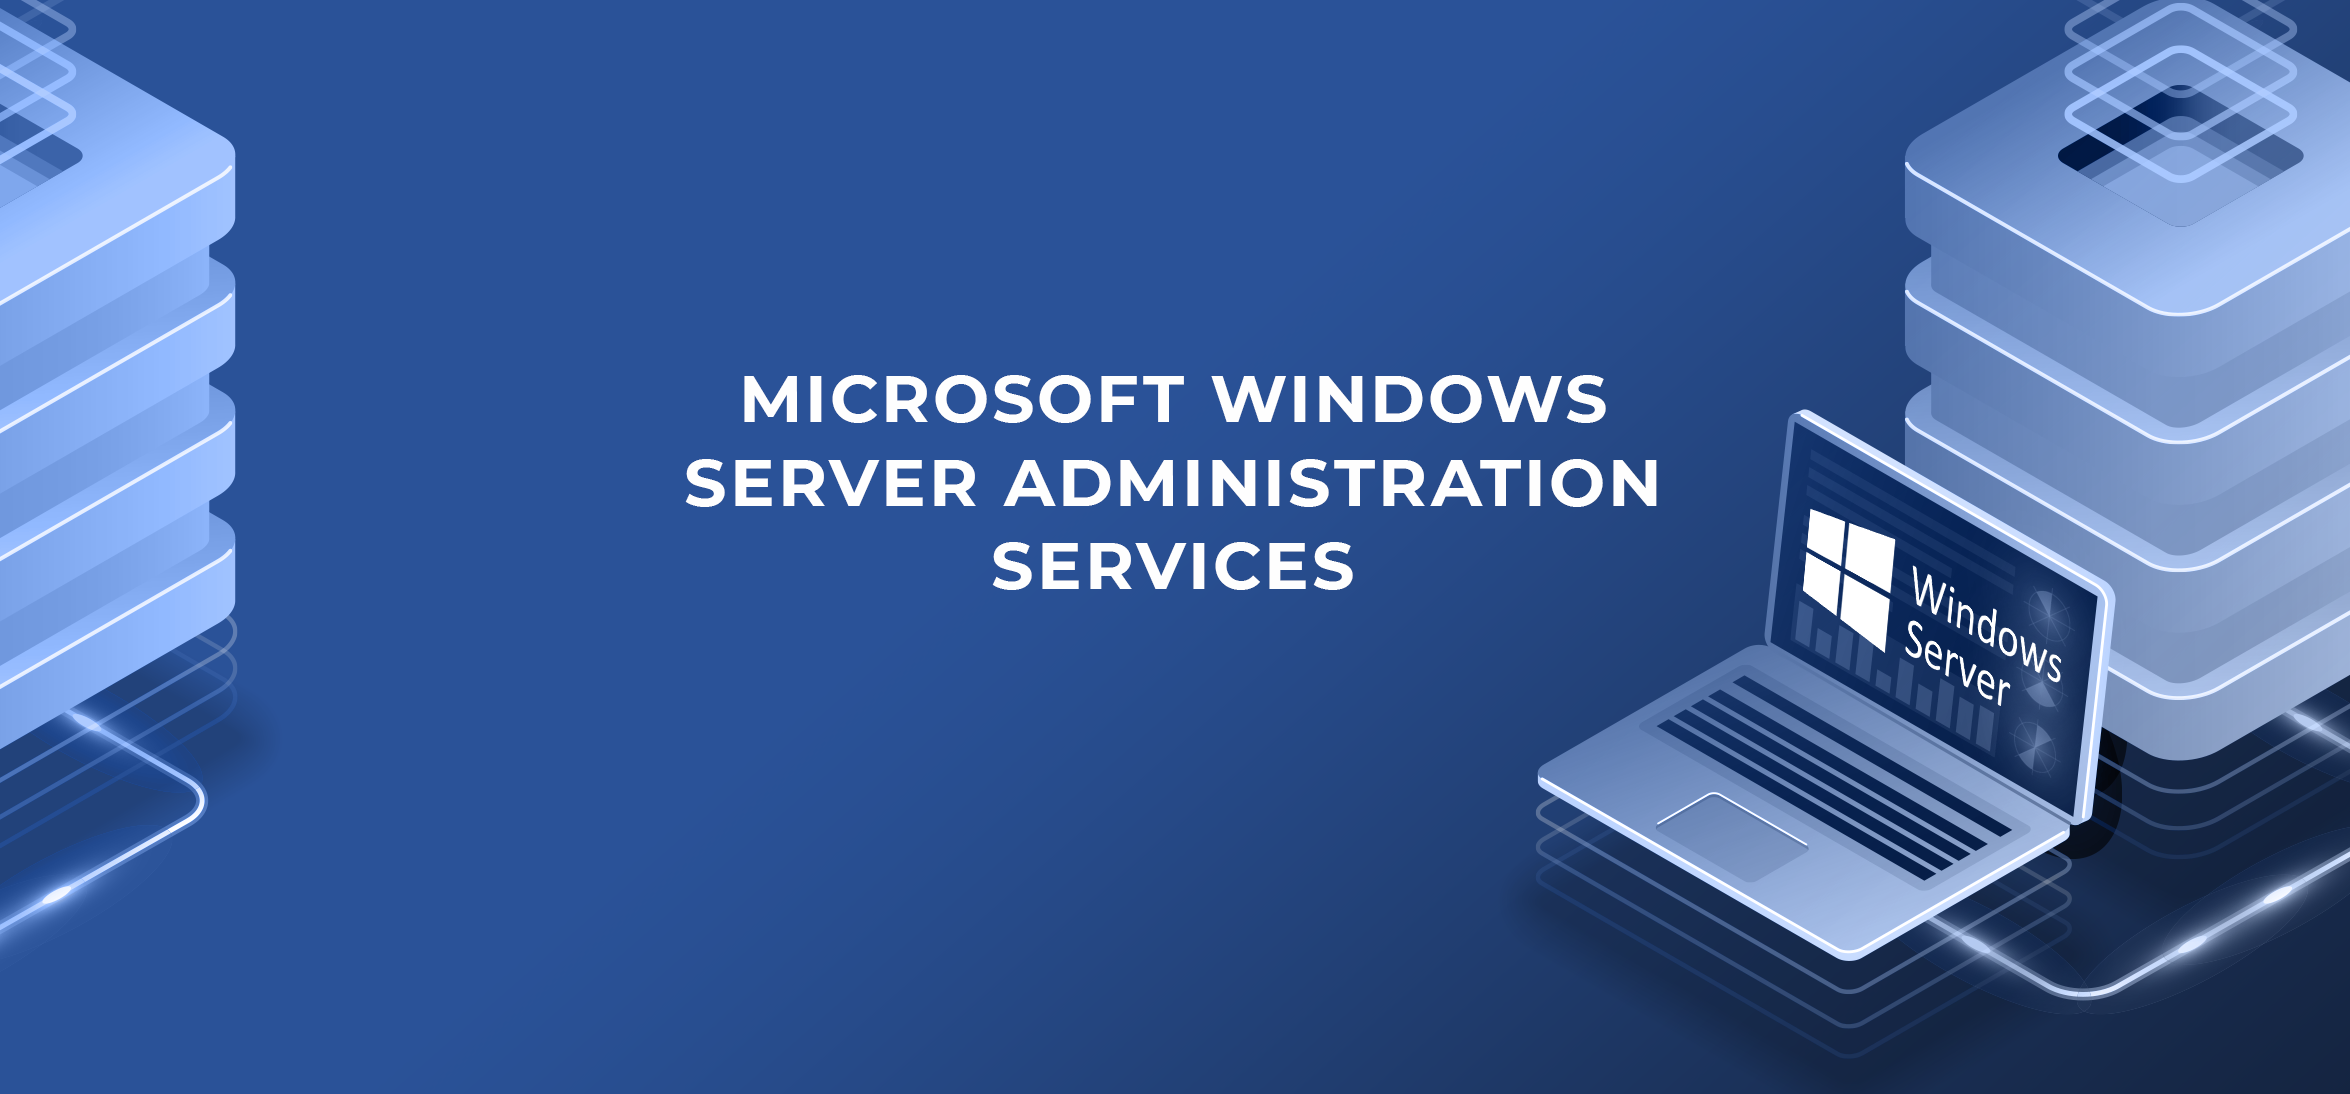 Effective Windows Server Administration and Support Solution Provider in Carlsbad CA, 92008